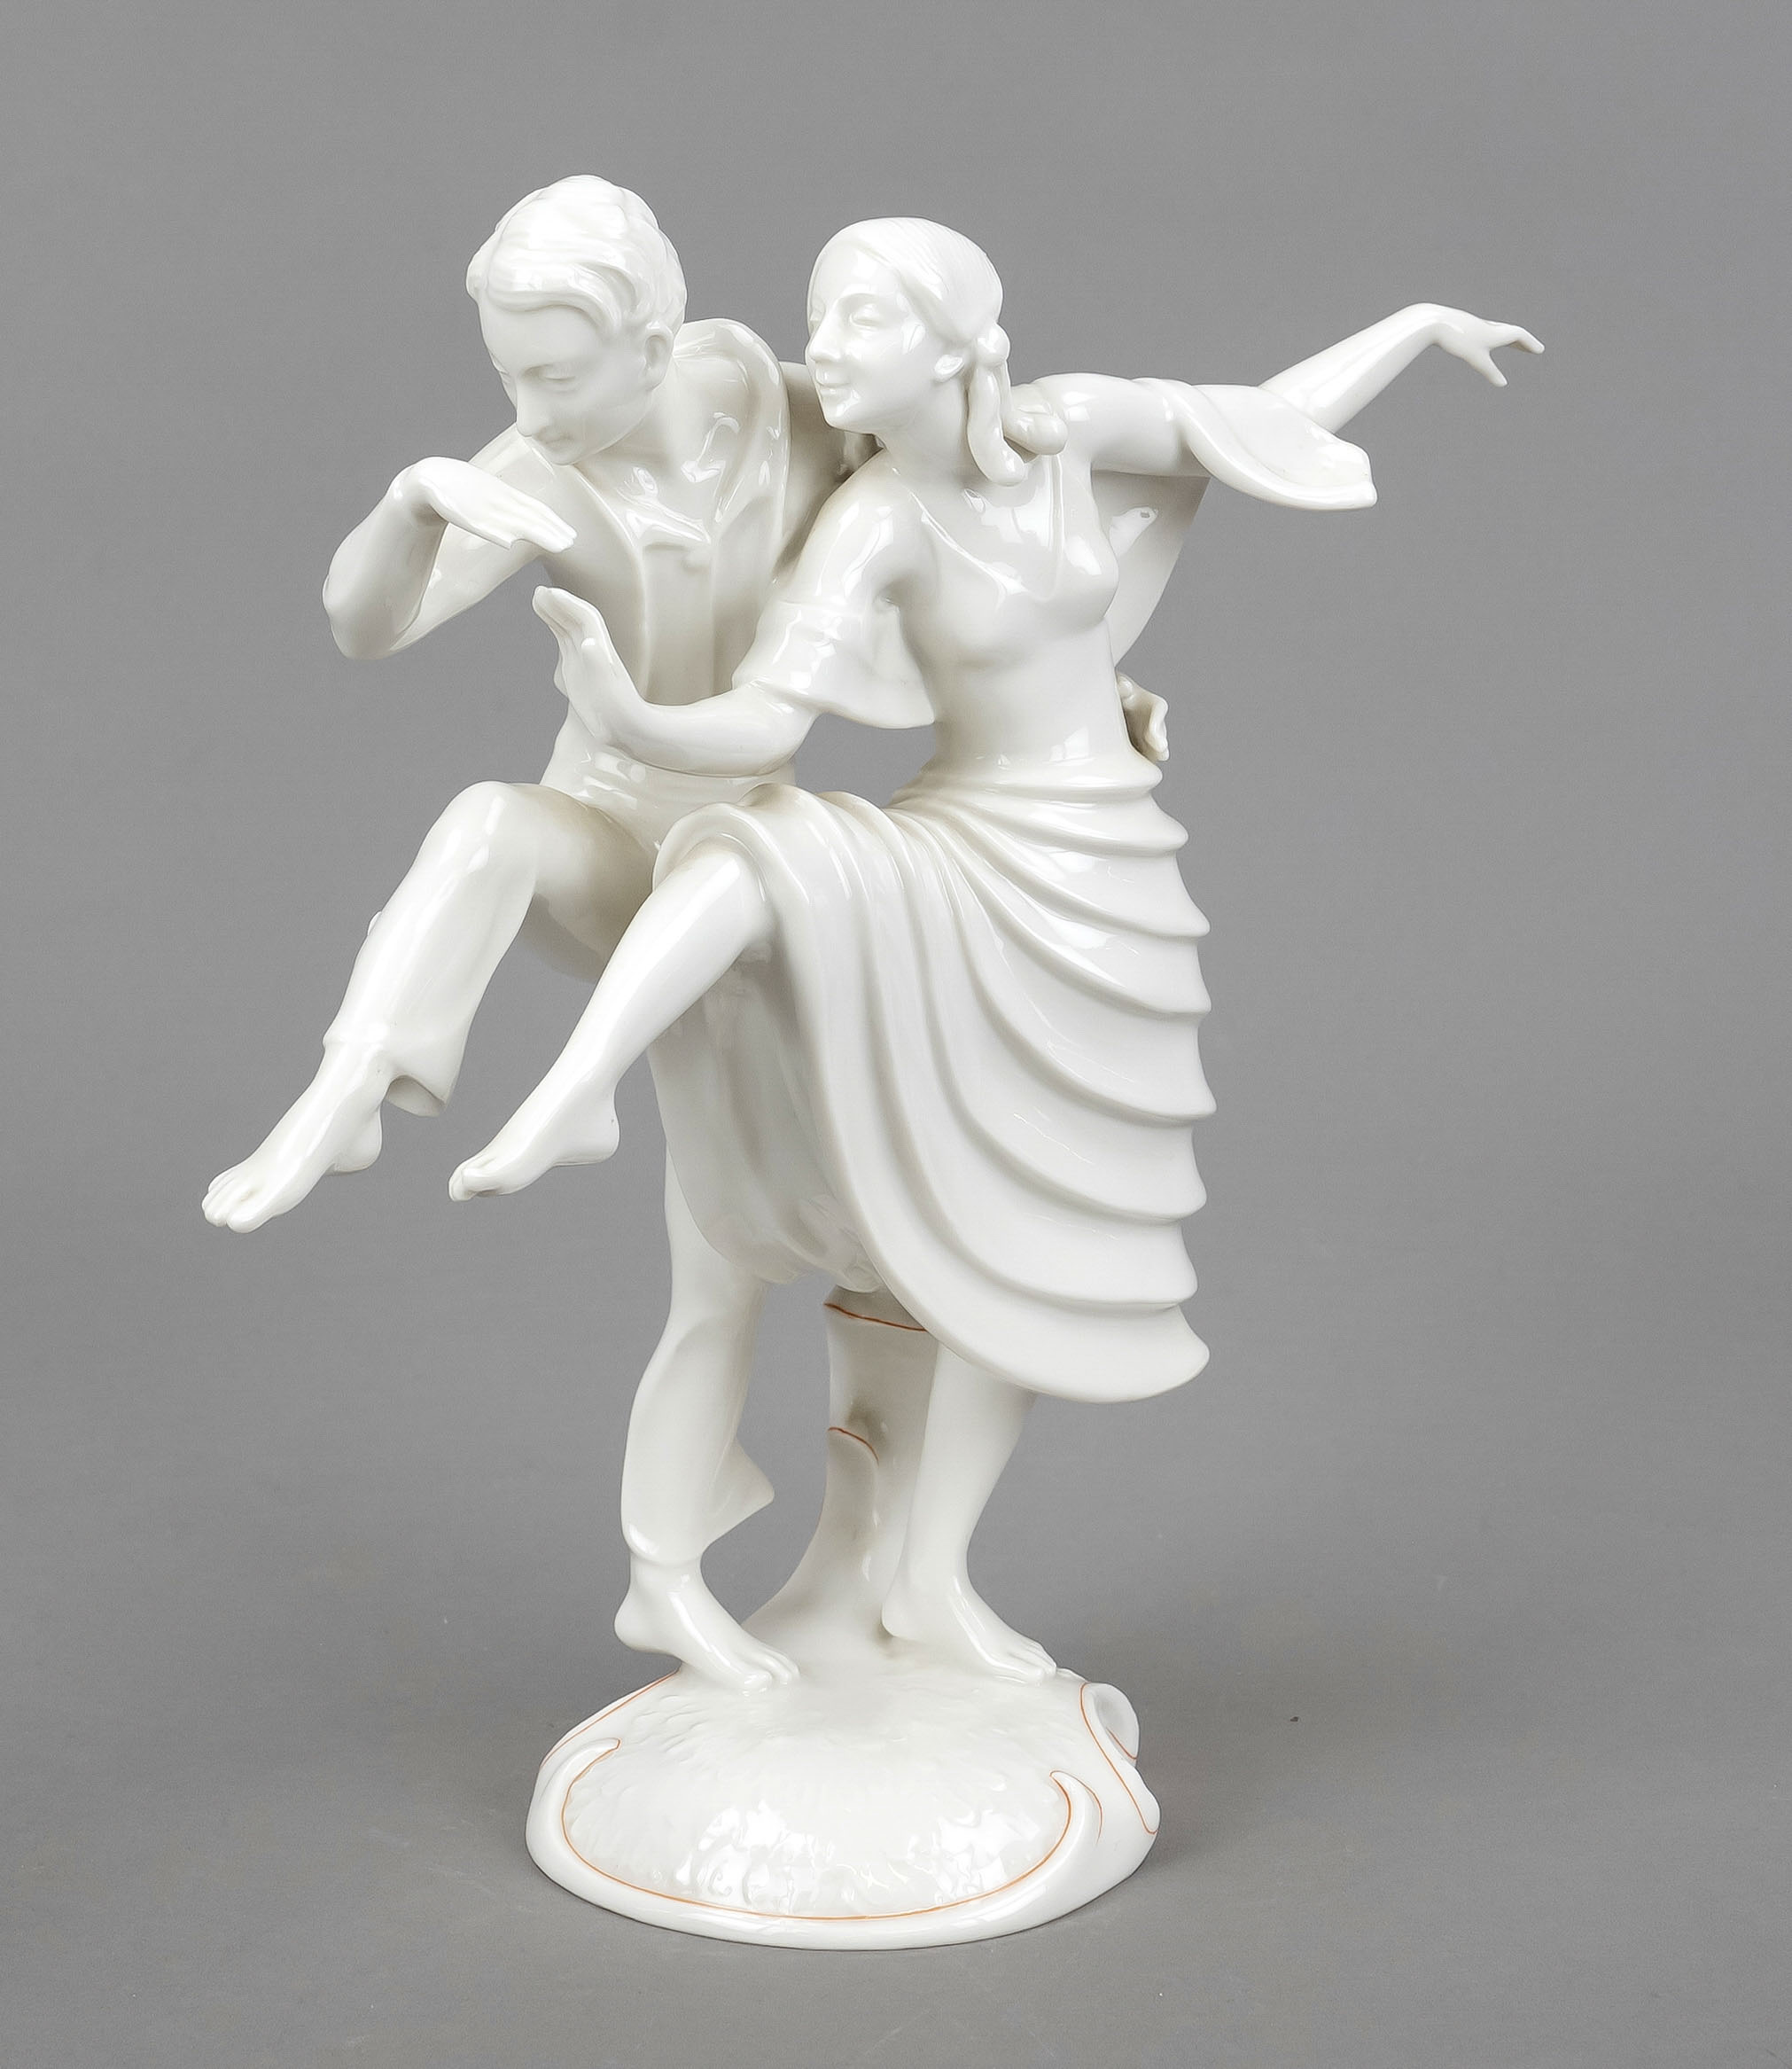 Dancing couple, Hutschenreuther, Selb art department, 1920s, designed by Carl Werner, white, on a